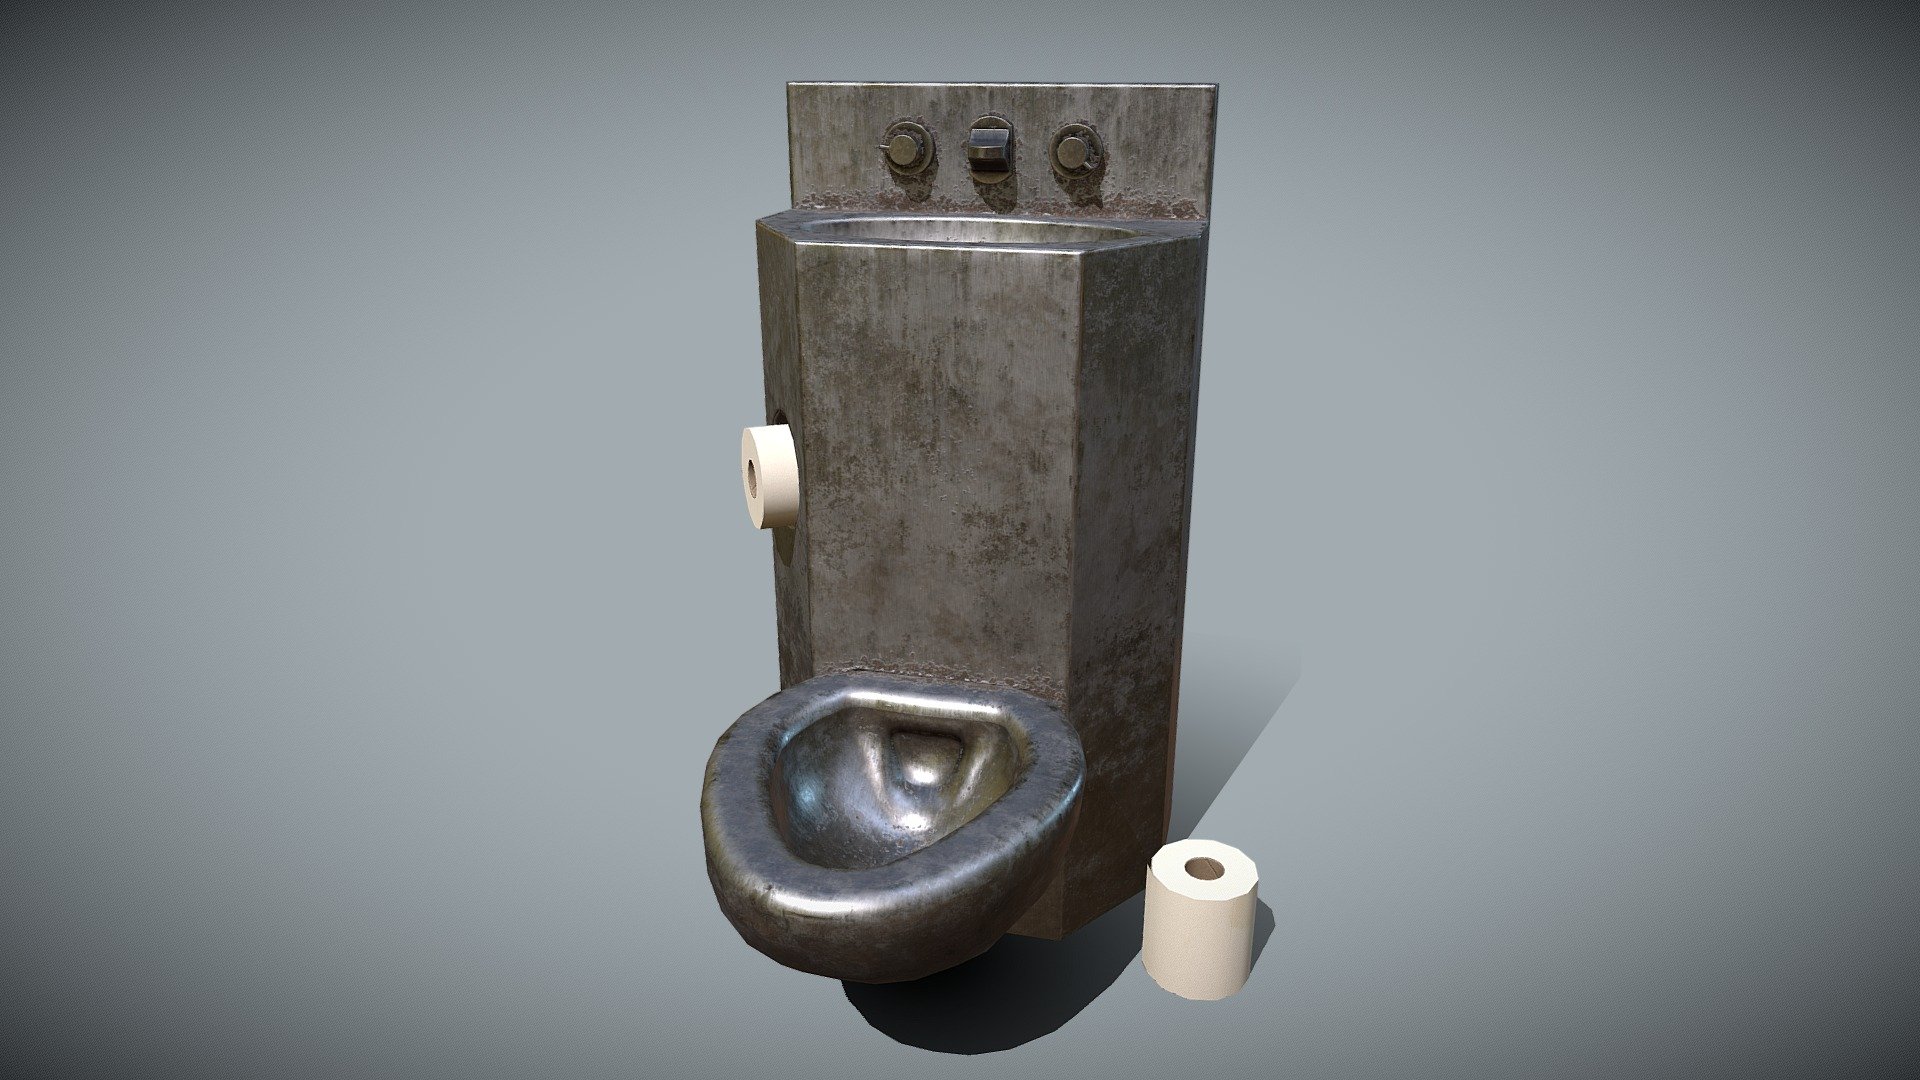 Low poly combination toilet and sink with toilet paper roll, for jail or prison asset pack ( https://skfb.ly/6FRq8 ) with 4k PBR textures.  Kit created in Blender and Substance Painter 3d model